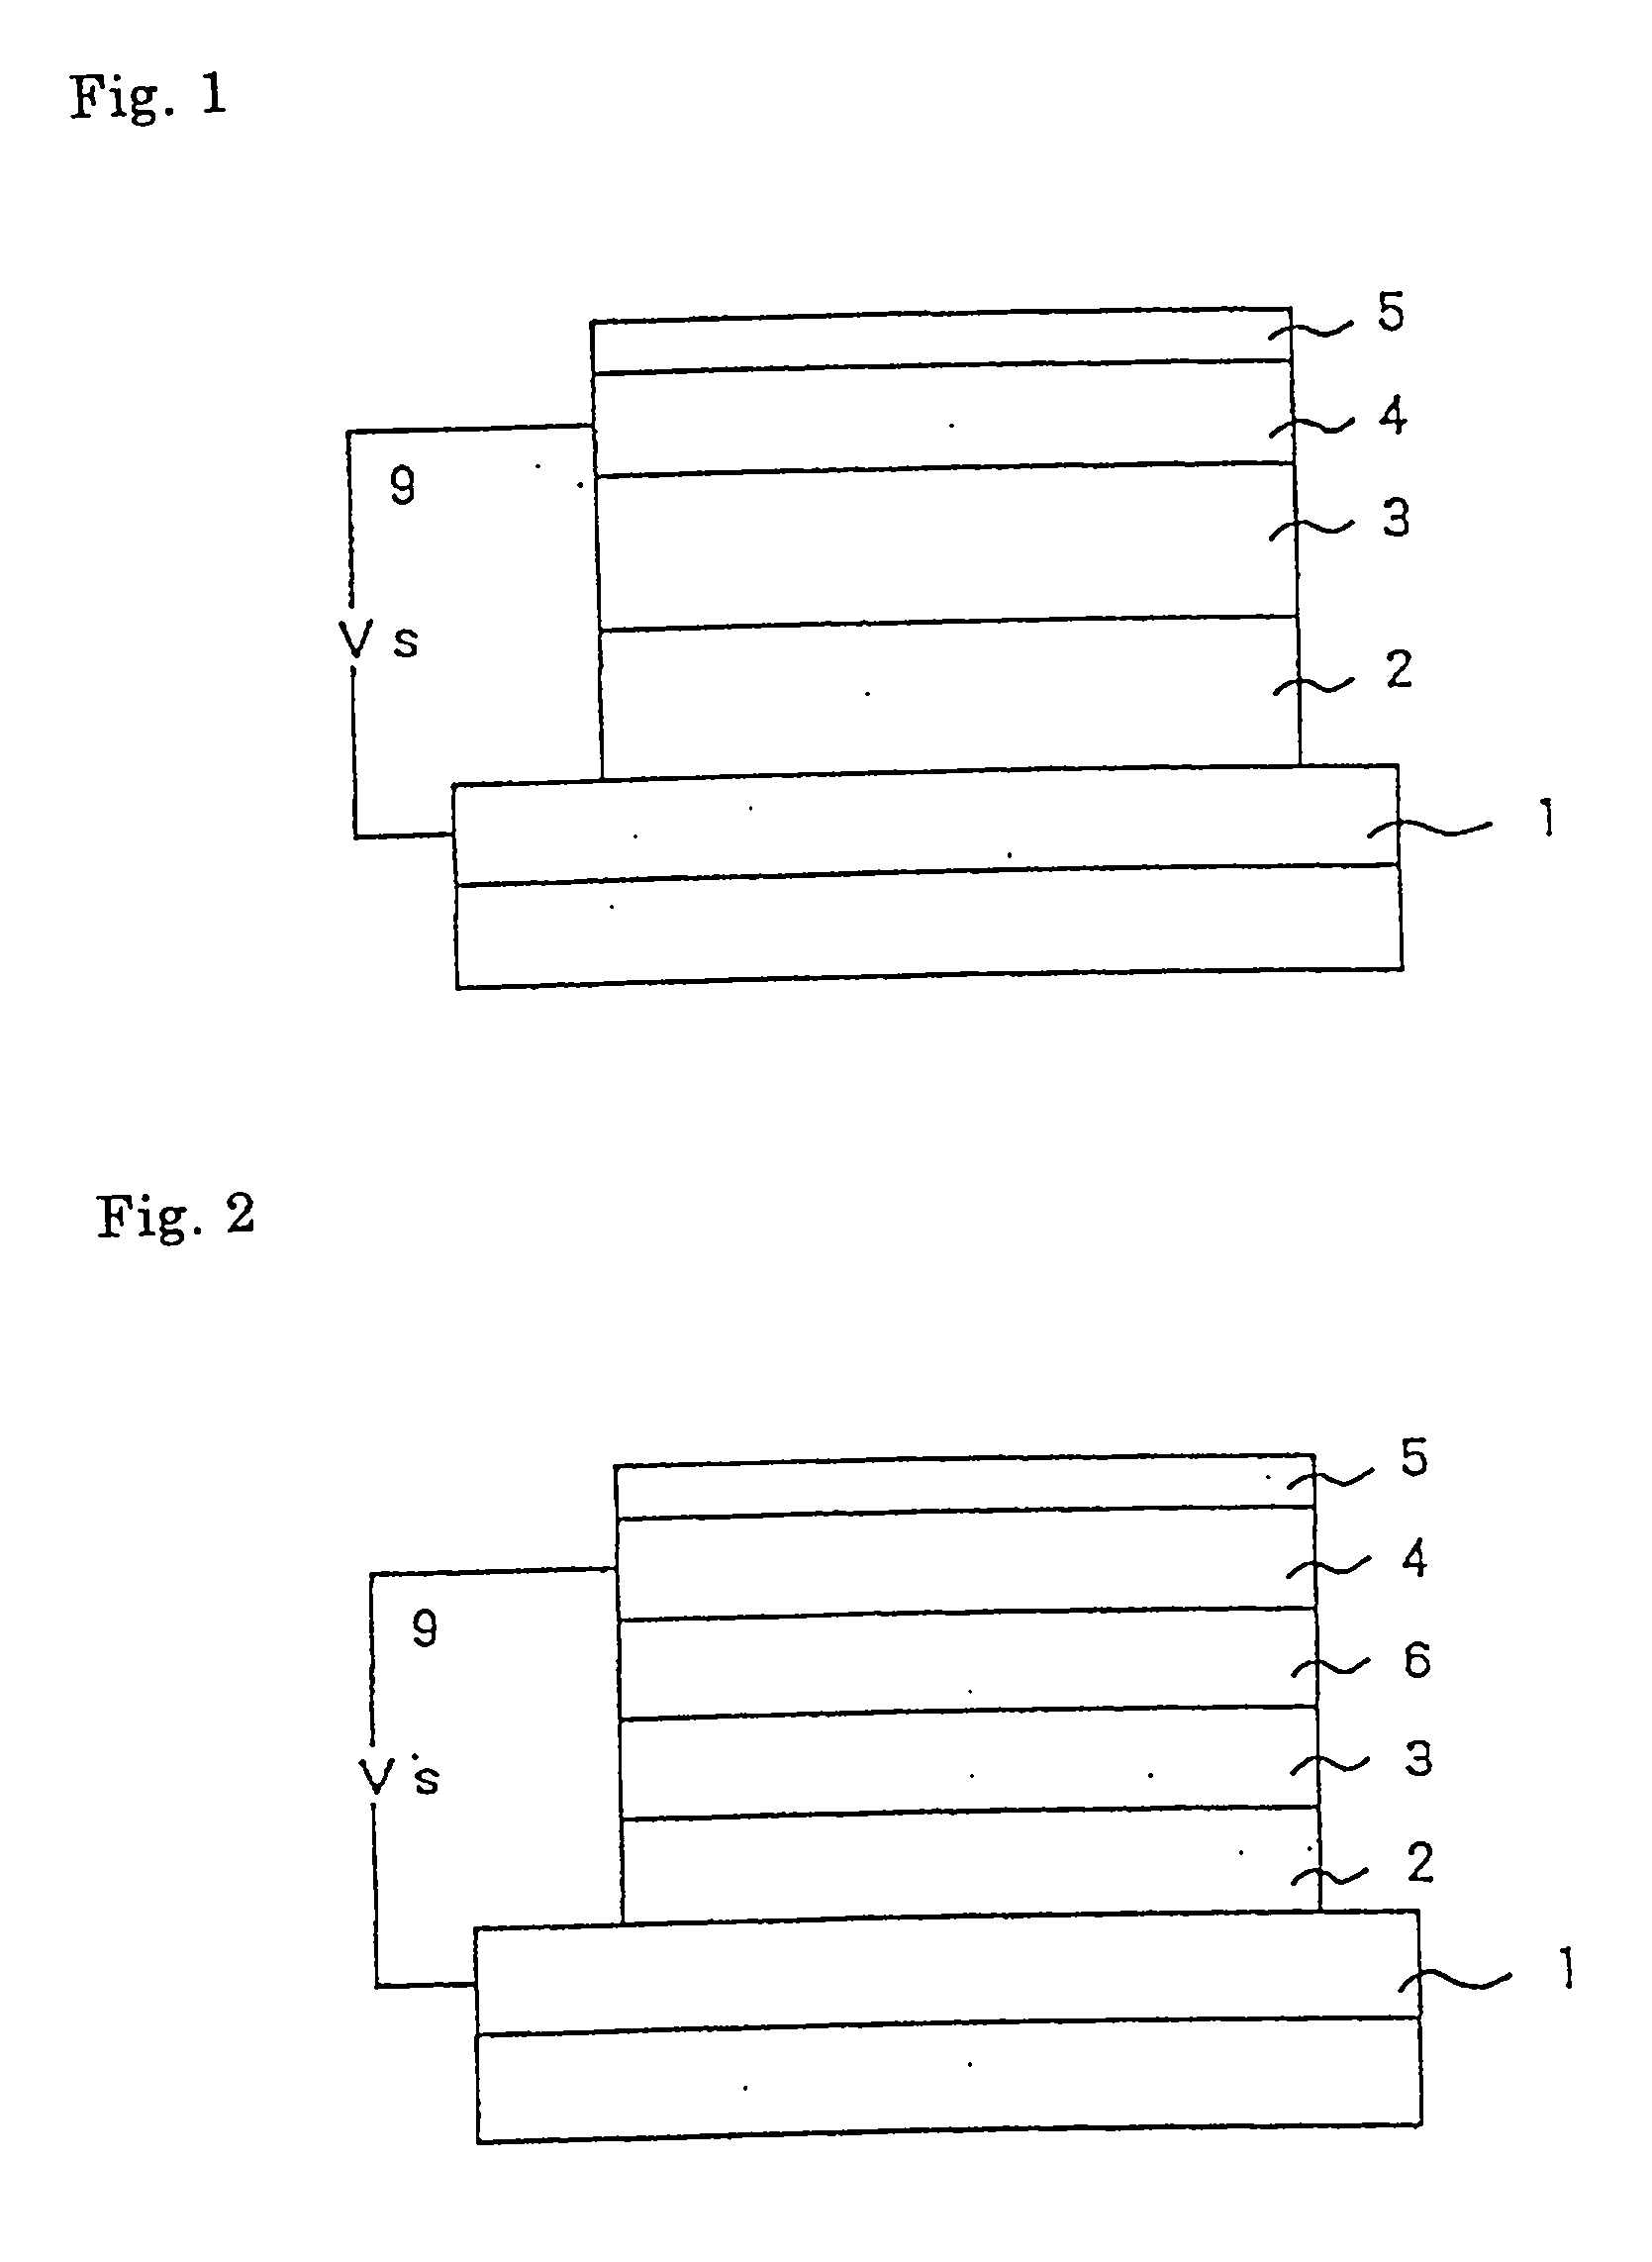 Organic electroluminecent element and method of manufacturing same